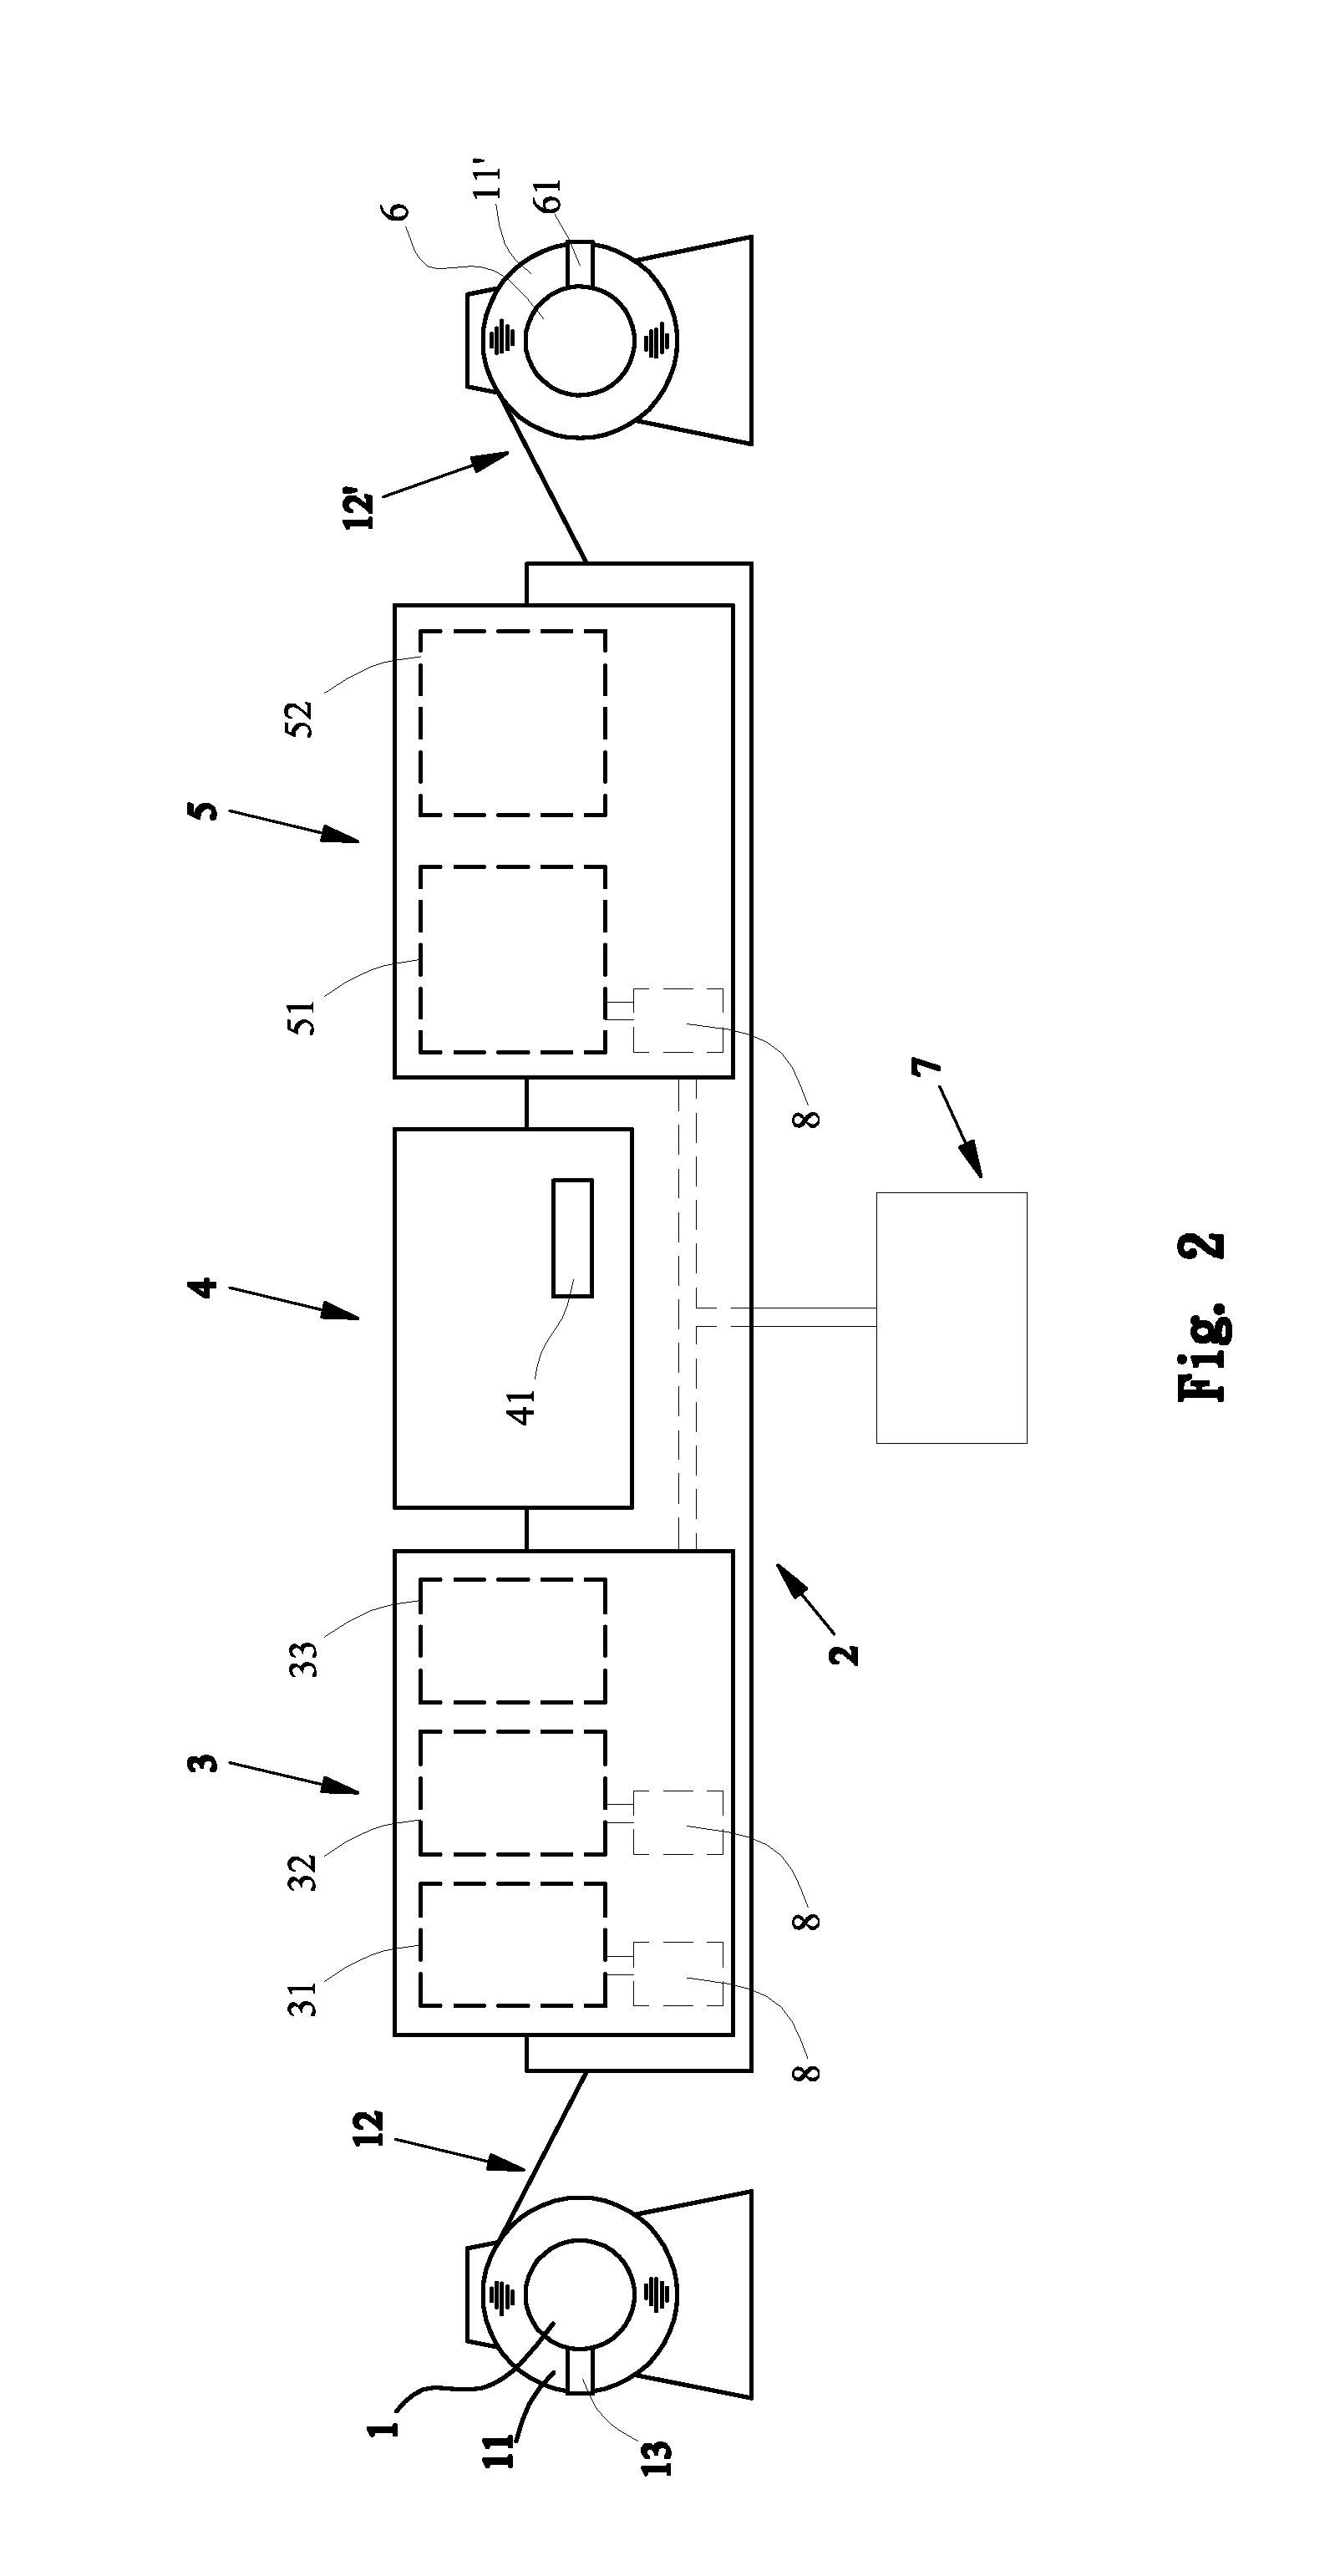 Roll-to-roll electrochemical polish apparatus